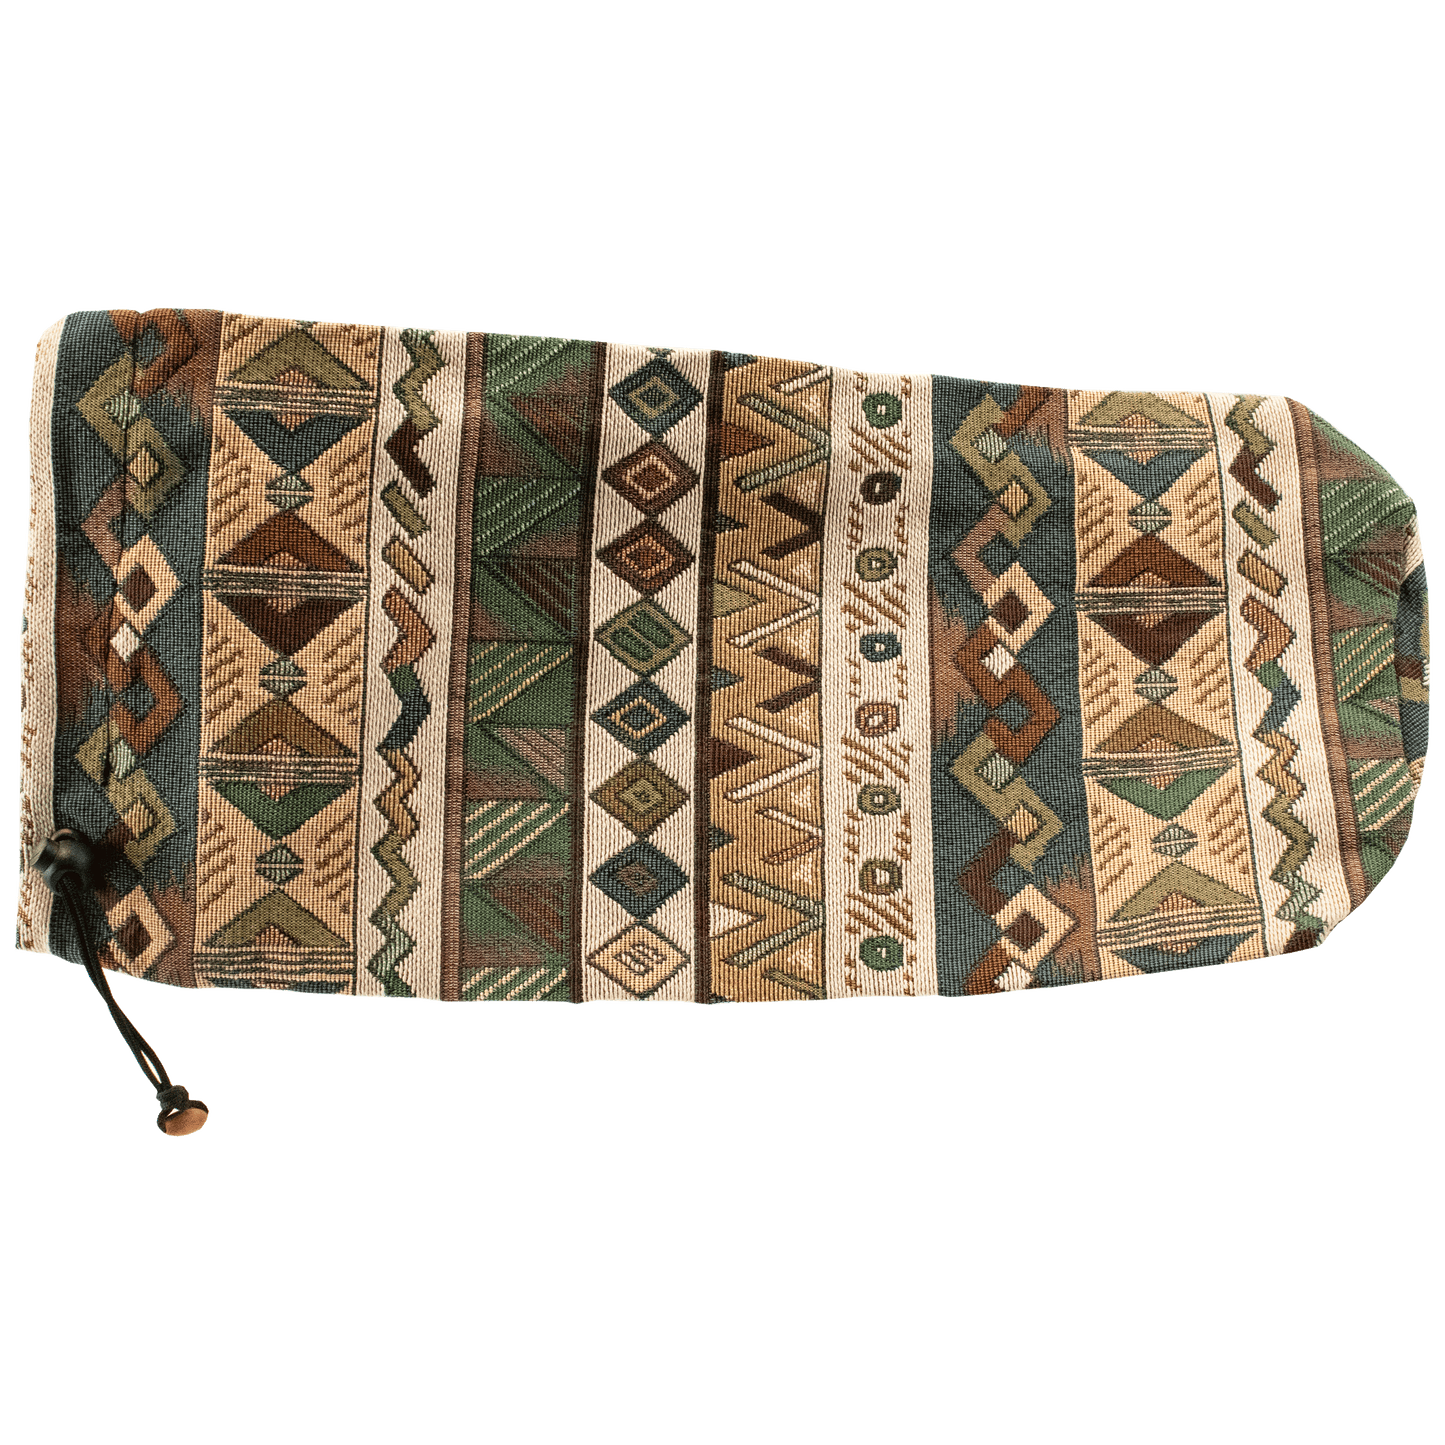 17 Inch Shofar Bag with earthy toned Tribal pattern and black drawstring